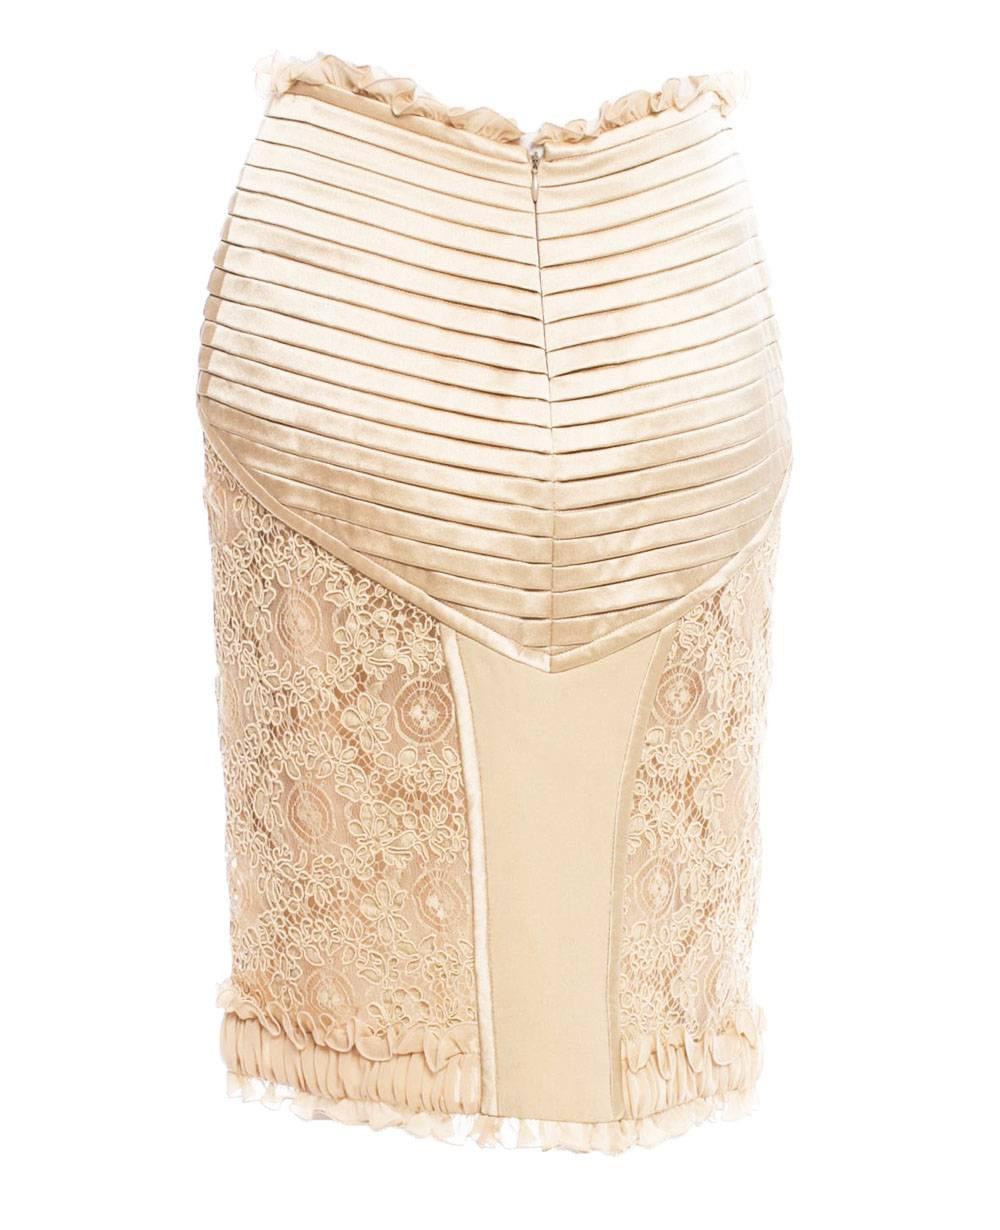 Valentino Champagne Sheer Lace Skirt
Measurements: Length - 23 inches, Waist - 28, Hip - 35.
Fully Lined.
Made in Italy
New without tag.